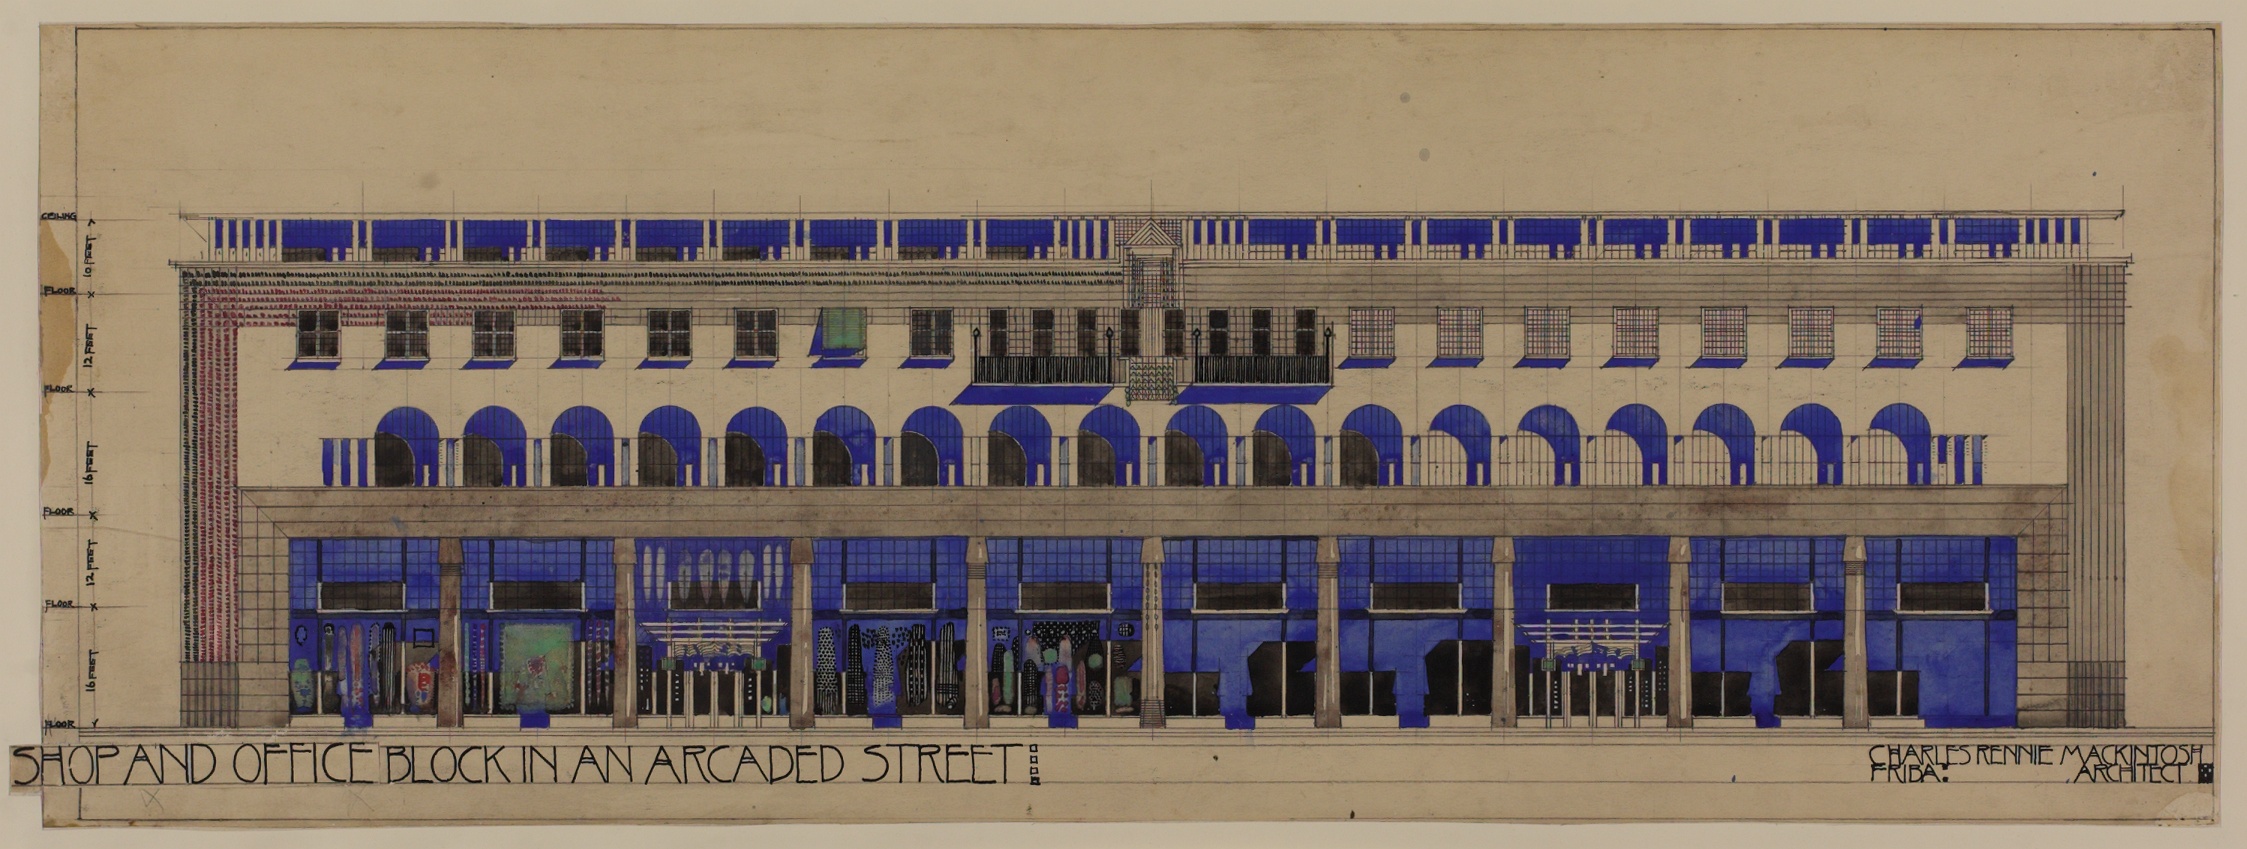 Charles Rennie Mackintosh. Designs for buildings in an arcaded street. [?1915–6]. Source: University of Glasgow